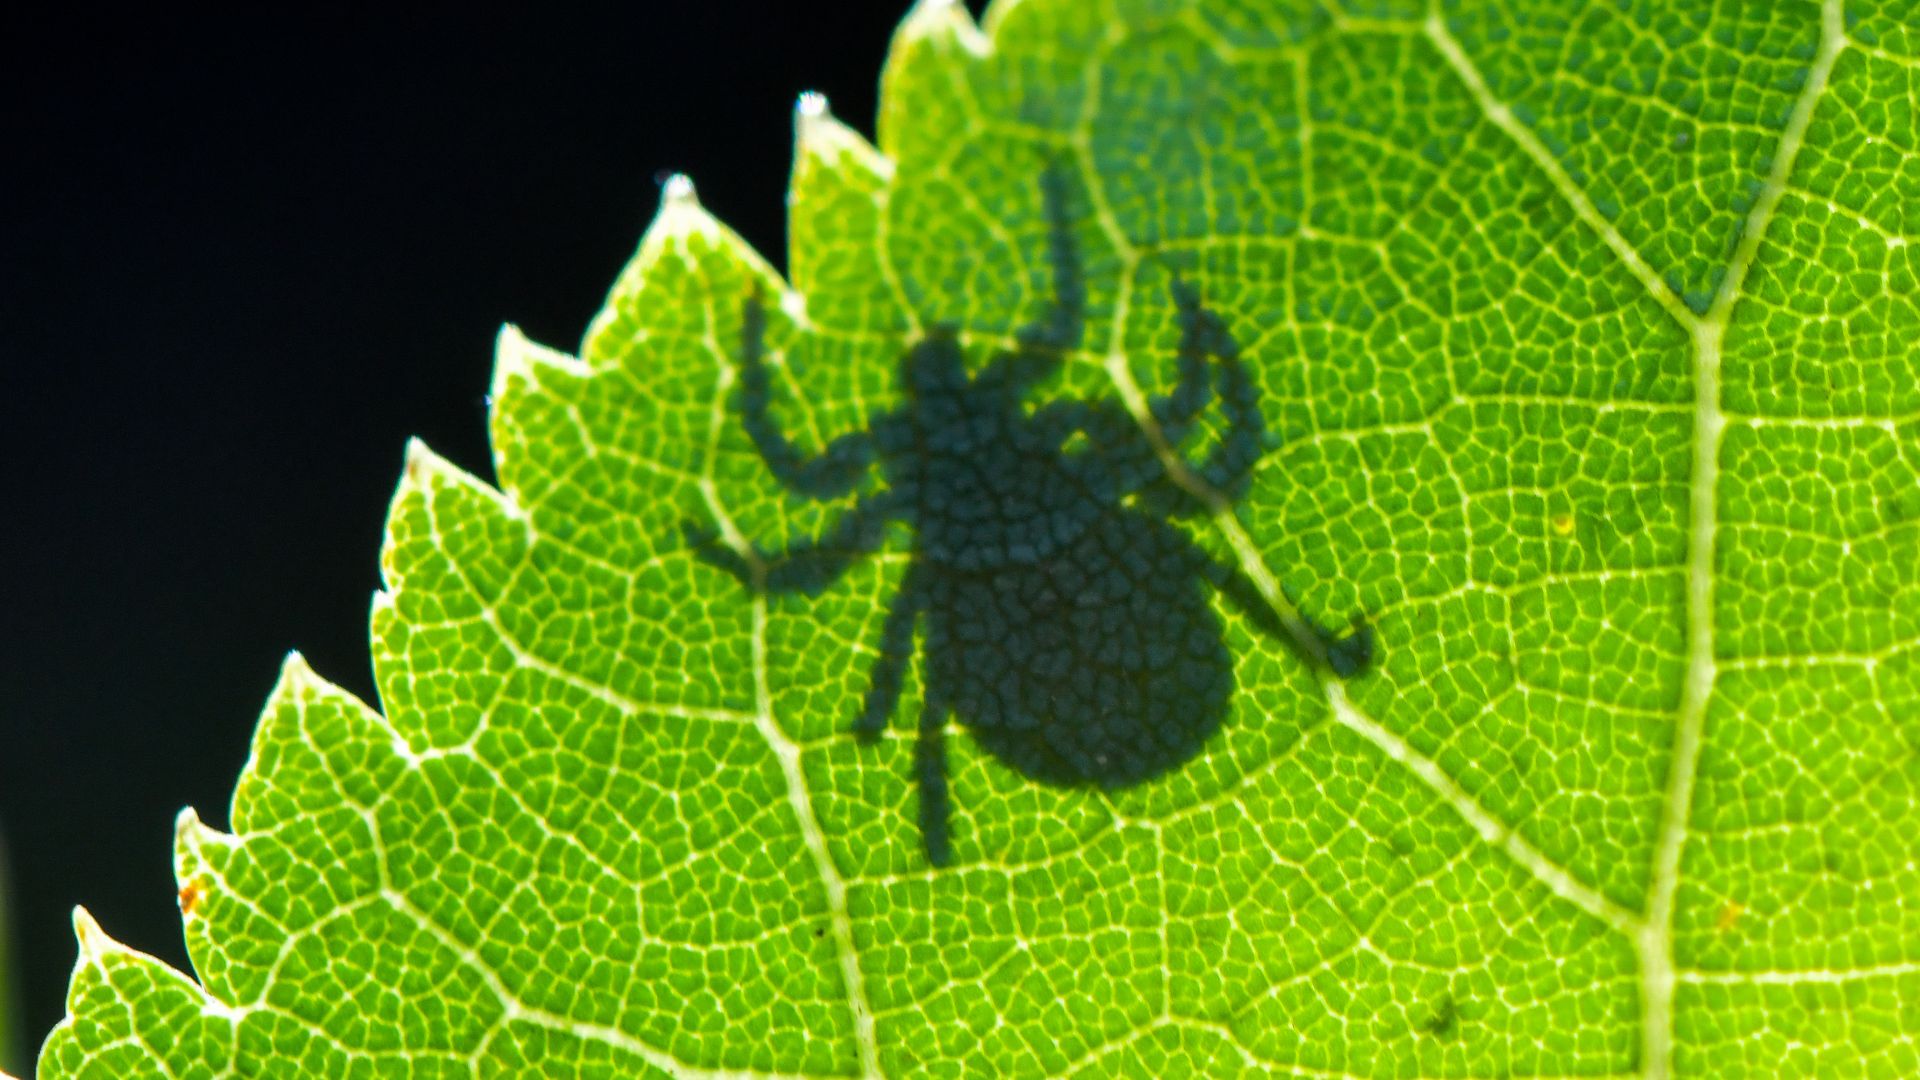 Picture of a tick behind a leaf